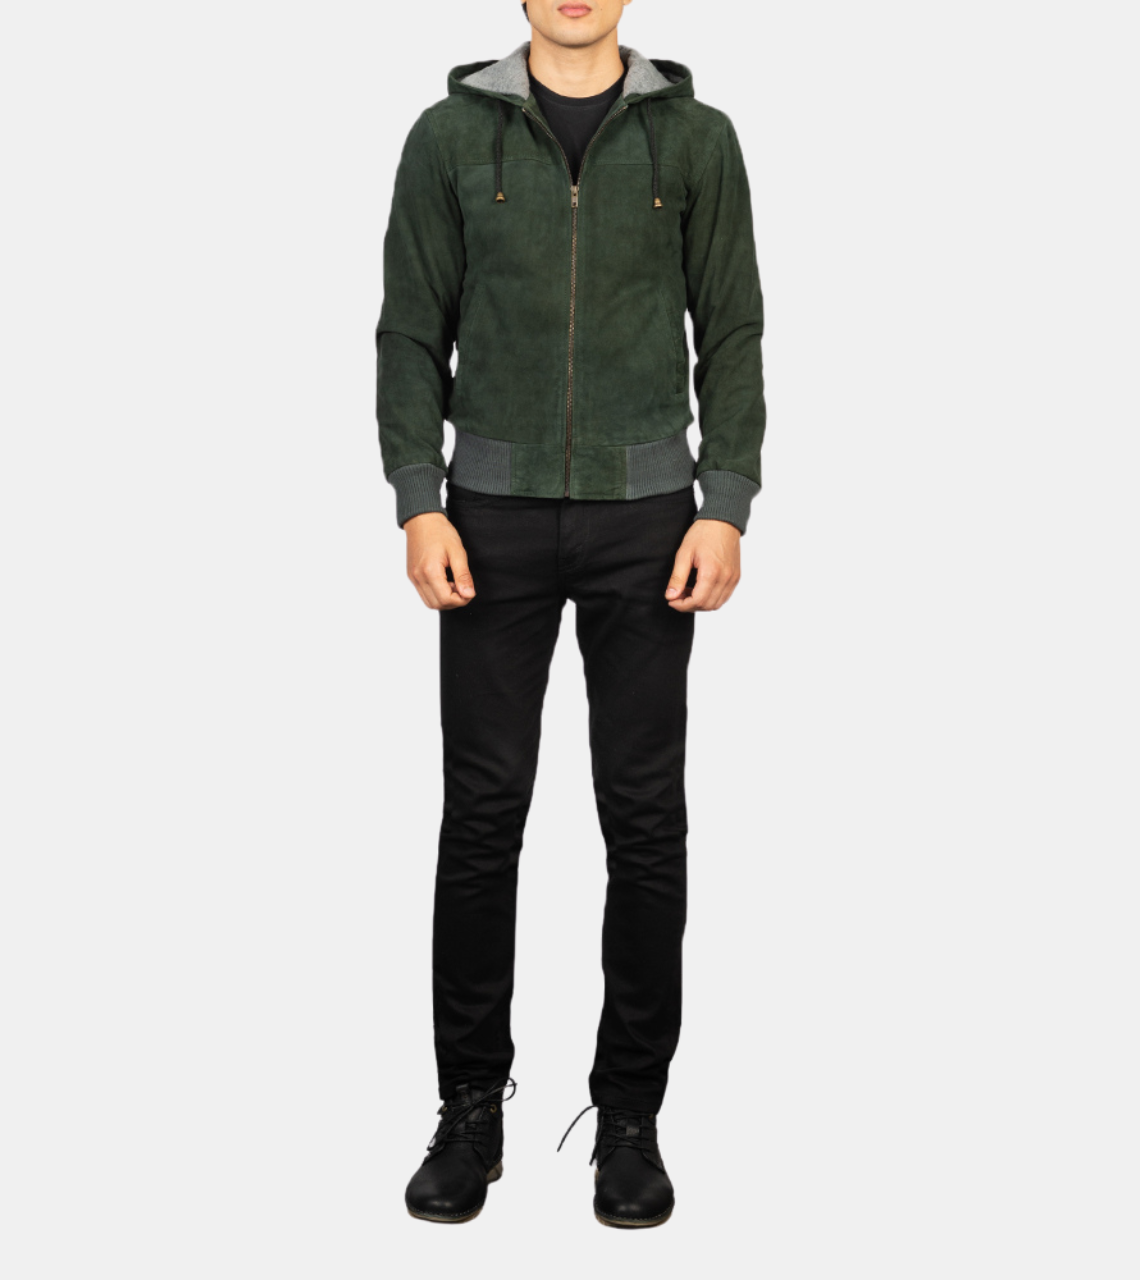 Men's Hooded Green Suede Leather Jacket 